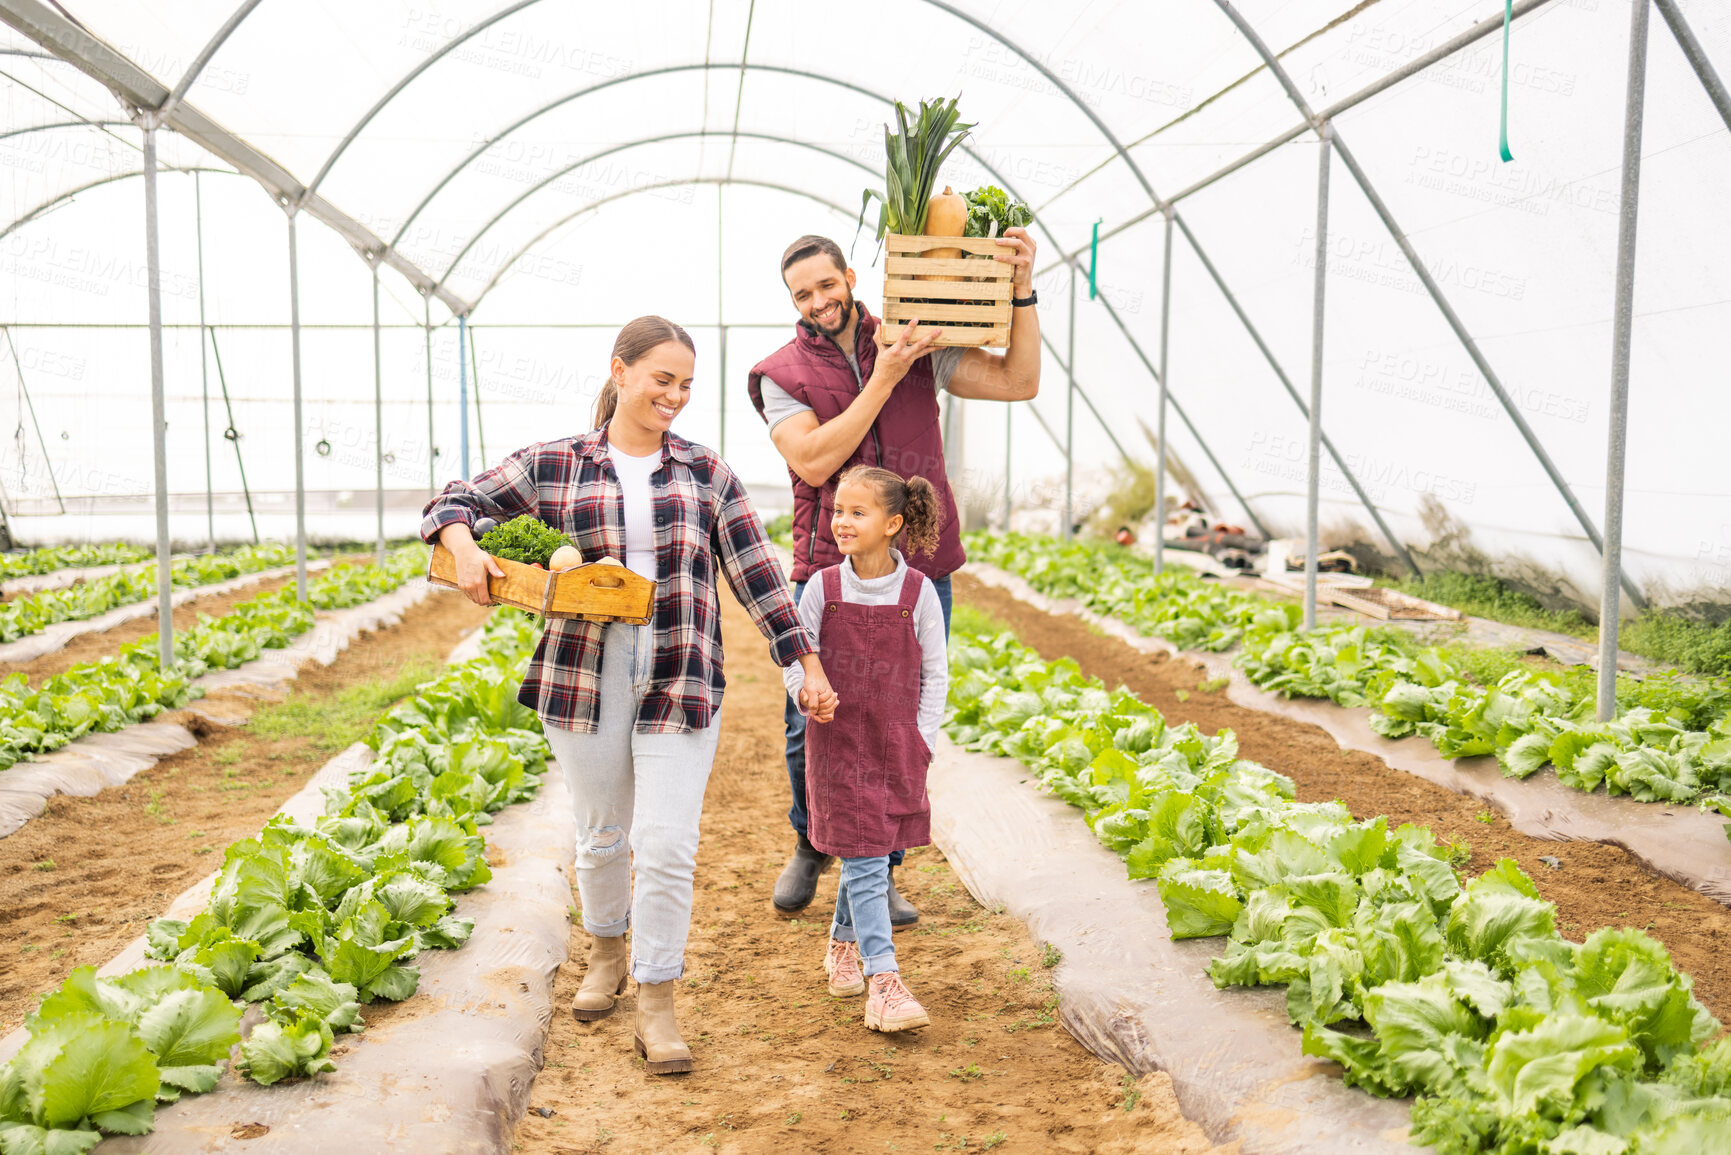 Buy stock photo Child with parents on family farm, vegetables garden in greenhouse or self sustainable lifestyle in Brazil. Healthy agriculture plants, happy mother and father with fruit food basket walking together